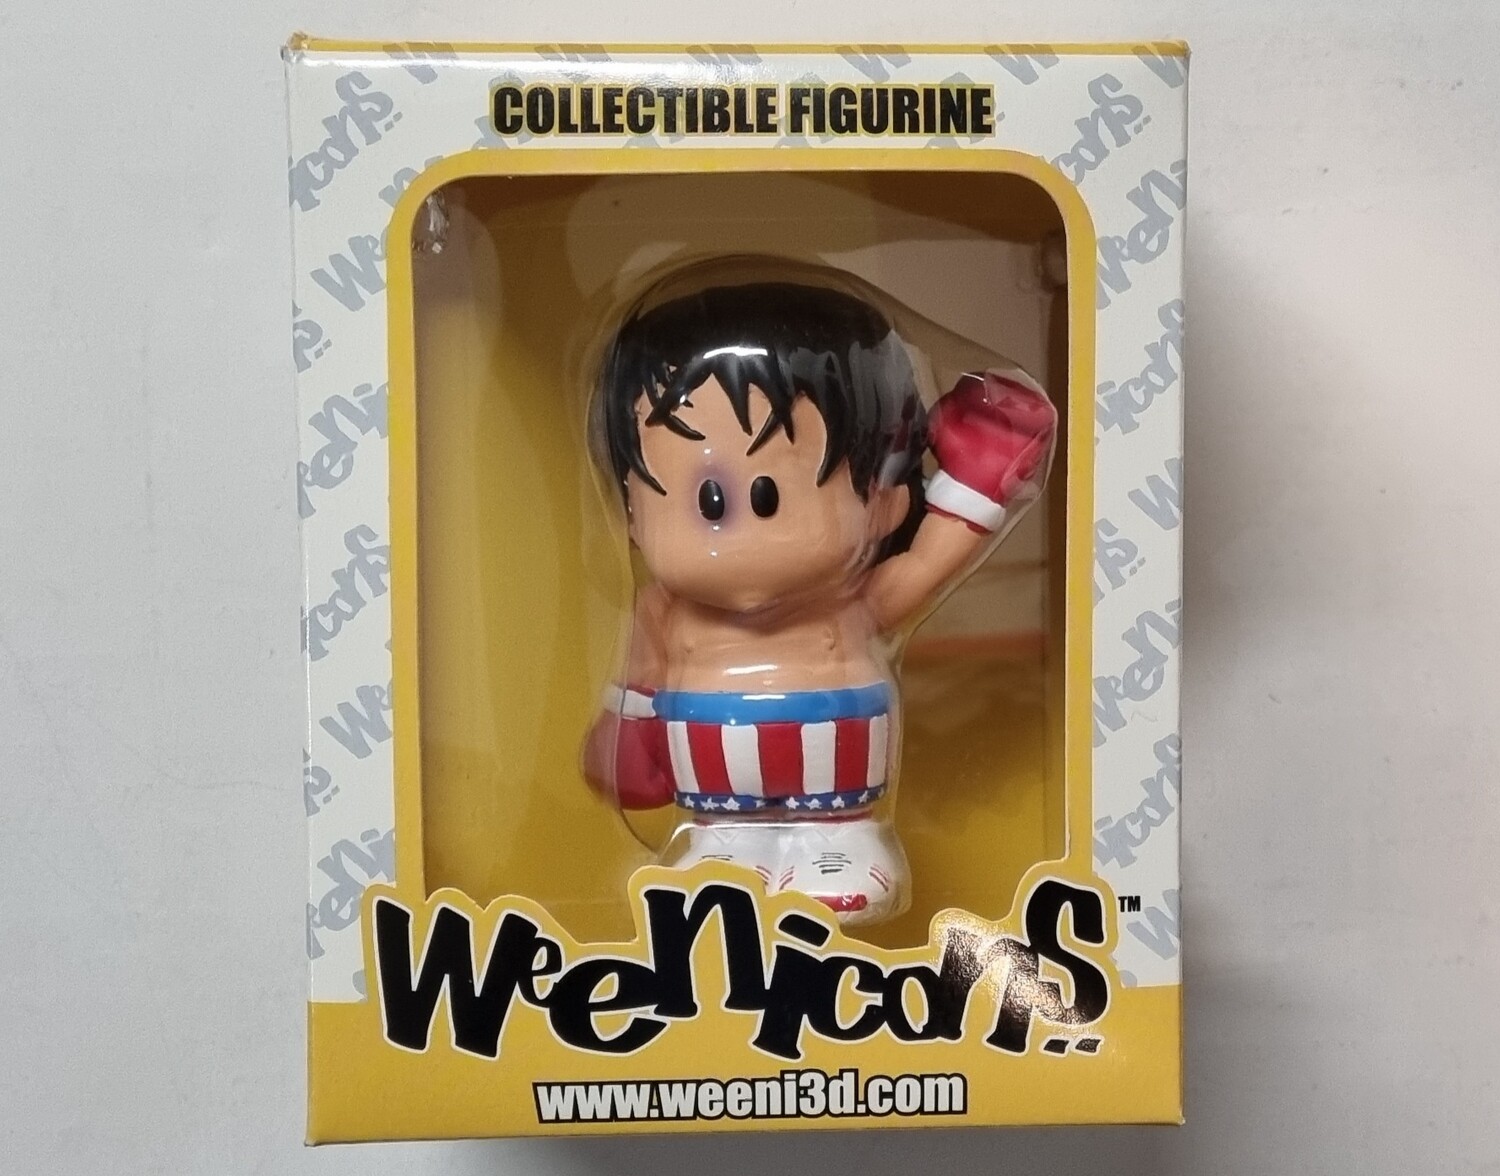 Figuurtje, Rocky Balboa, Weenicons, Collectible Figurines, Sylvester Stallone